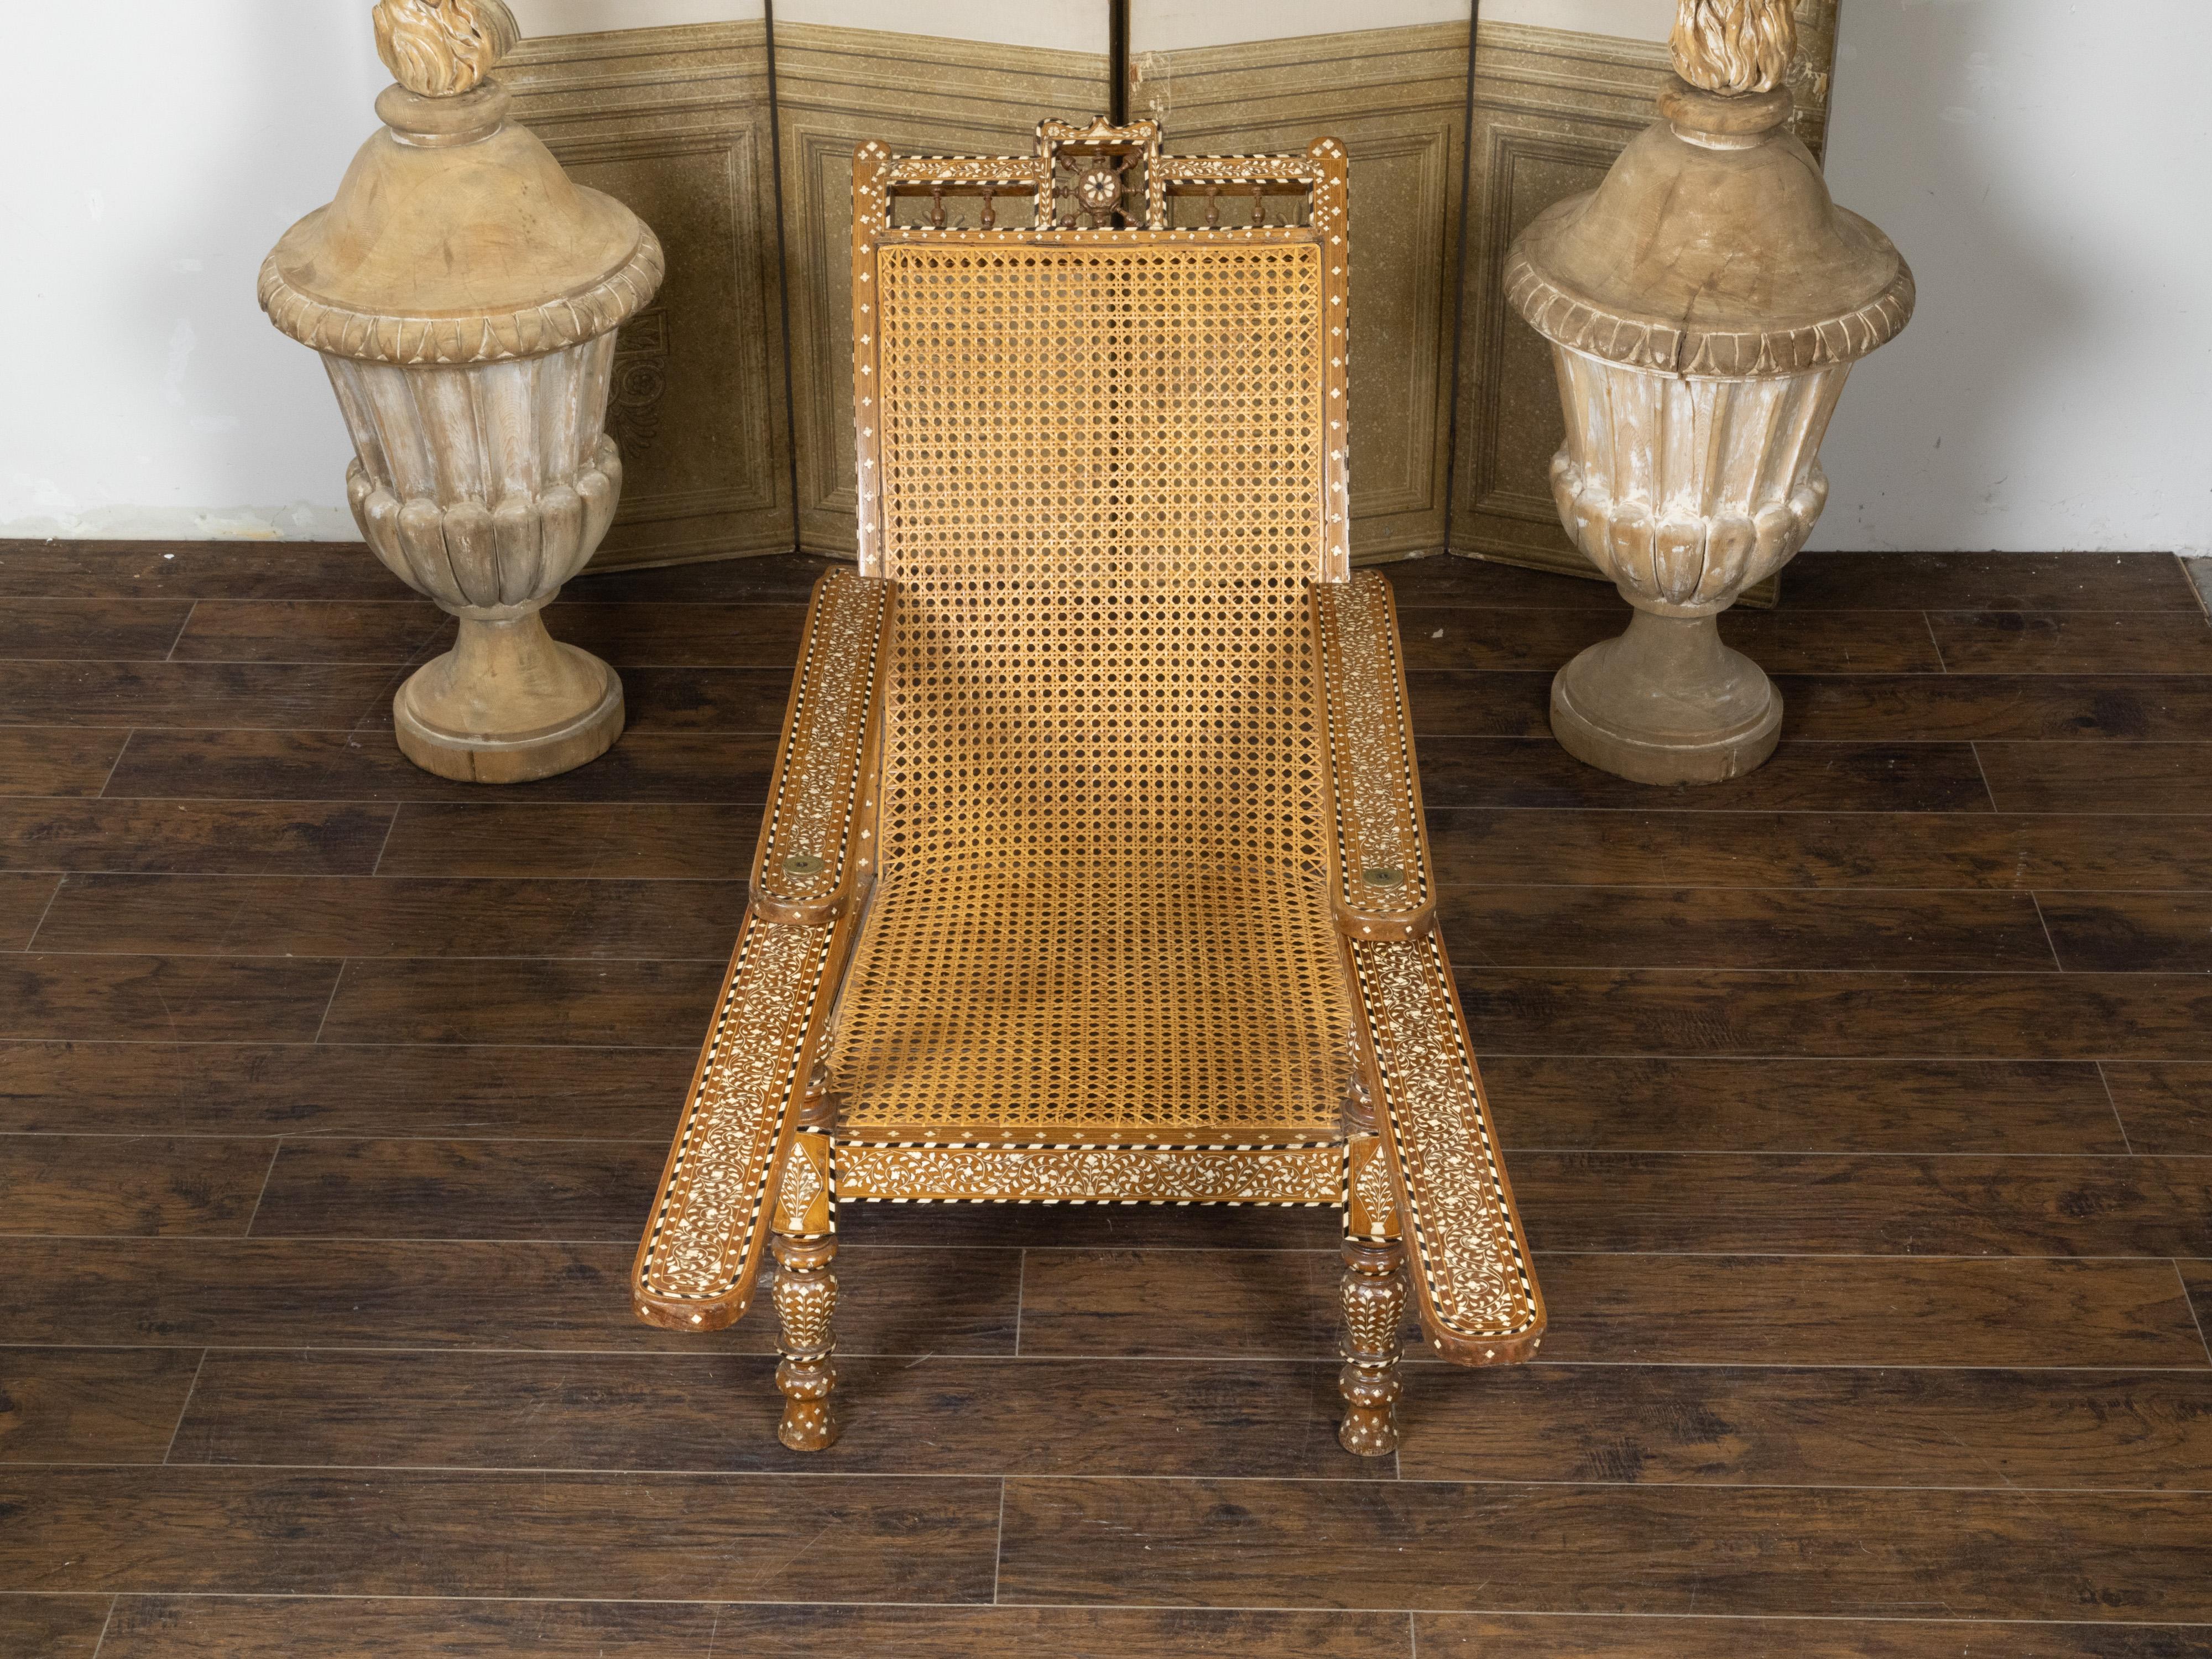 Anglo-Indian Inlaid Plantation Chair with Scrolling Foliage and Extending Arms For Sale 2